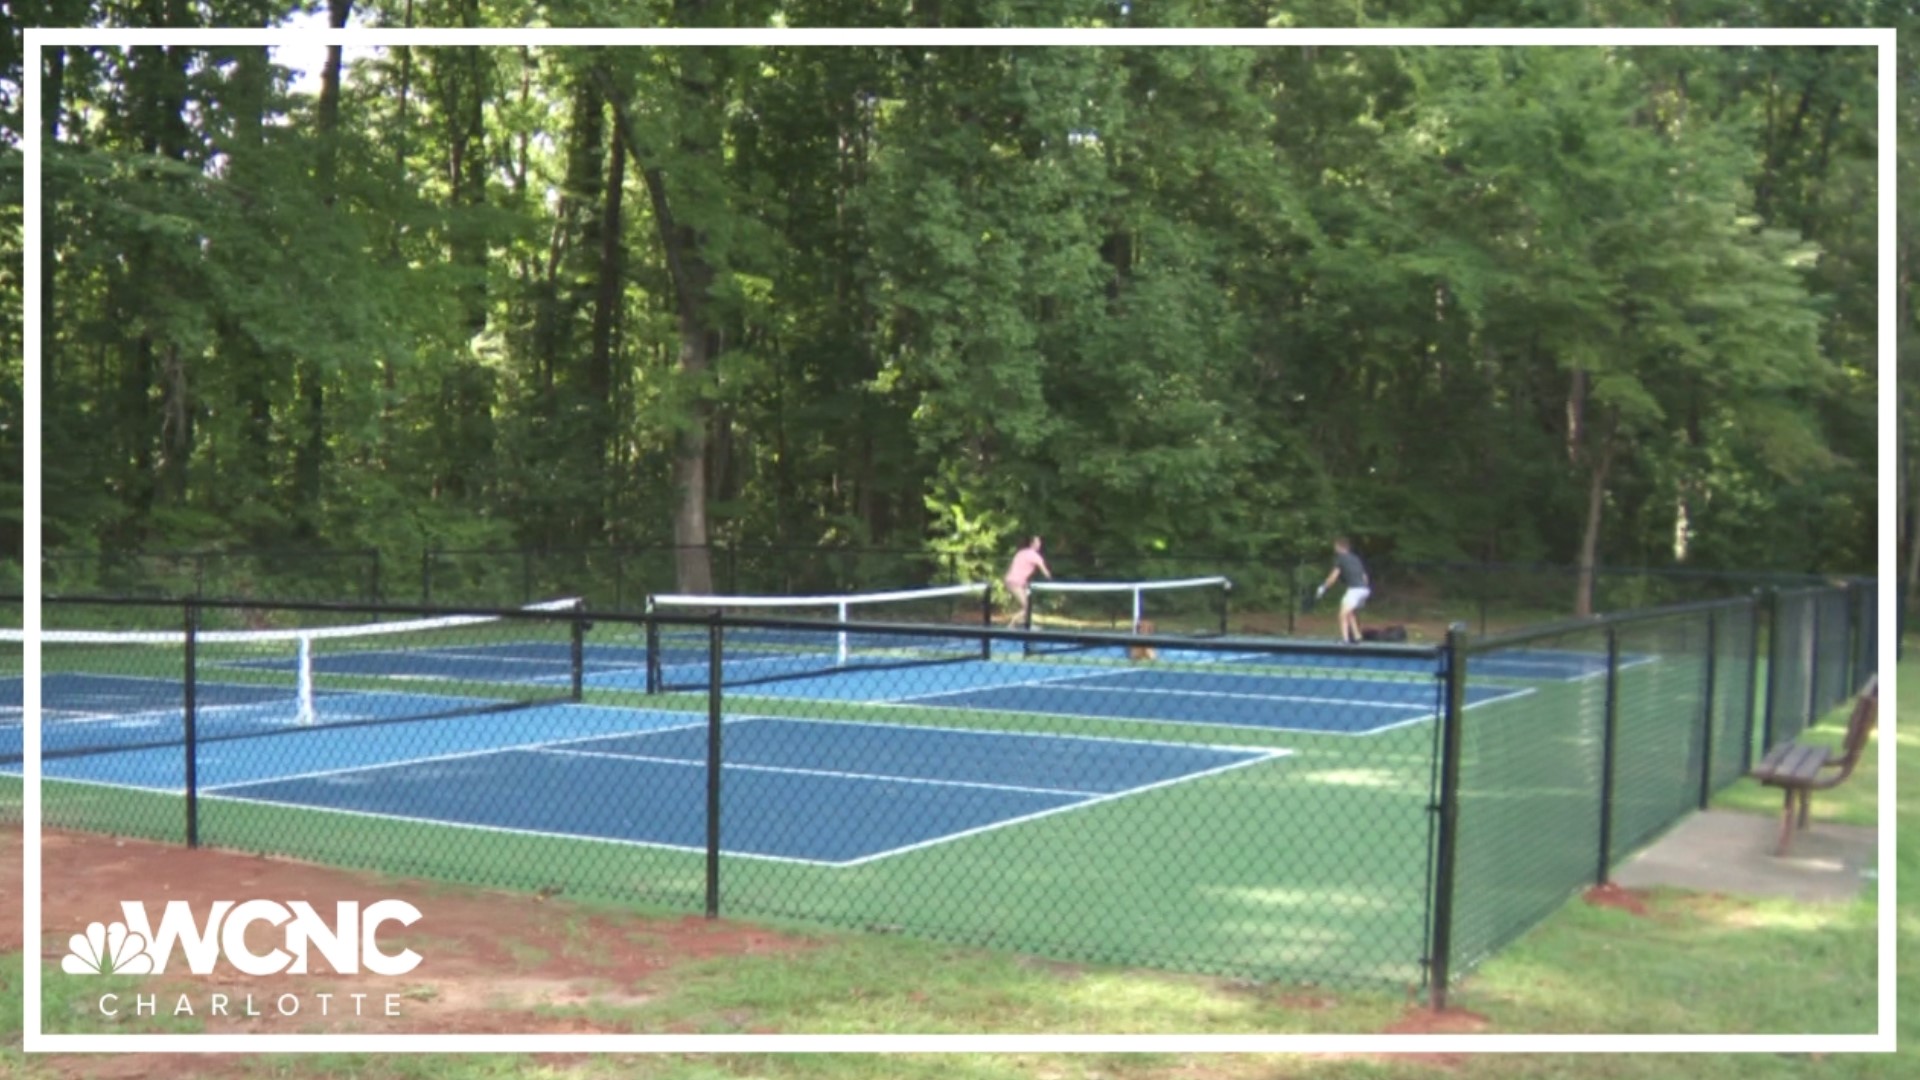 The Mecklenburg County Park and Recreation Department is updating controversial new pickleball courts in east Charlotte.